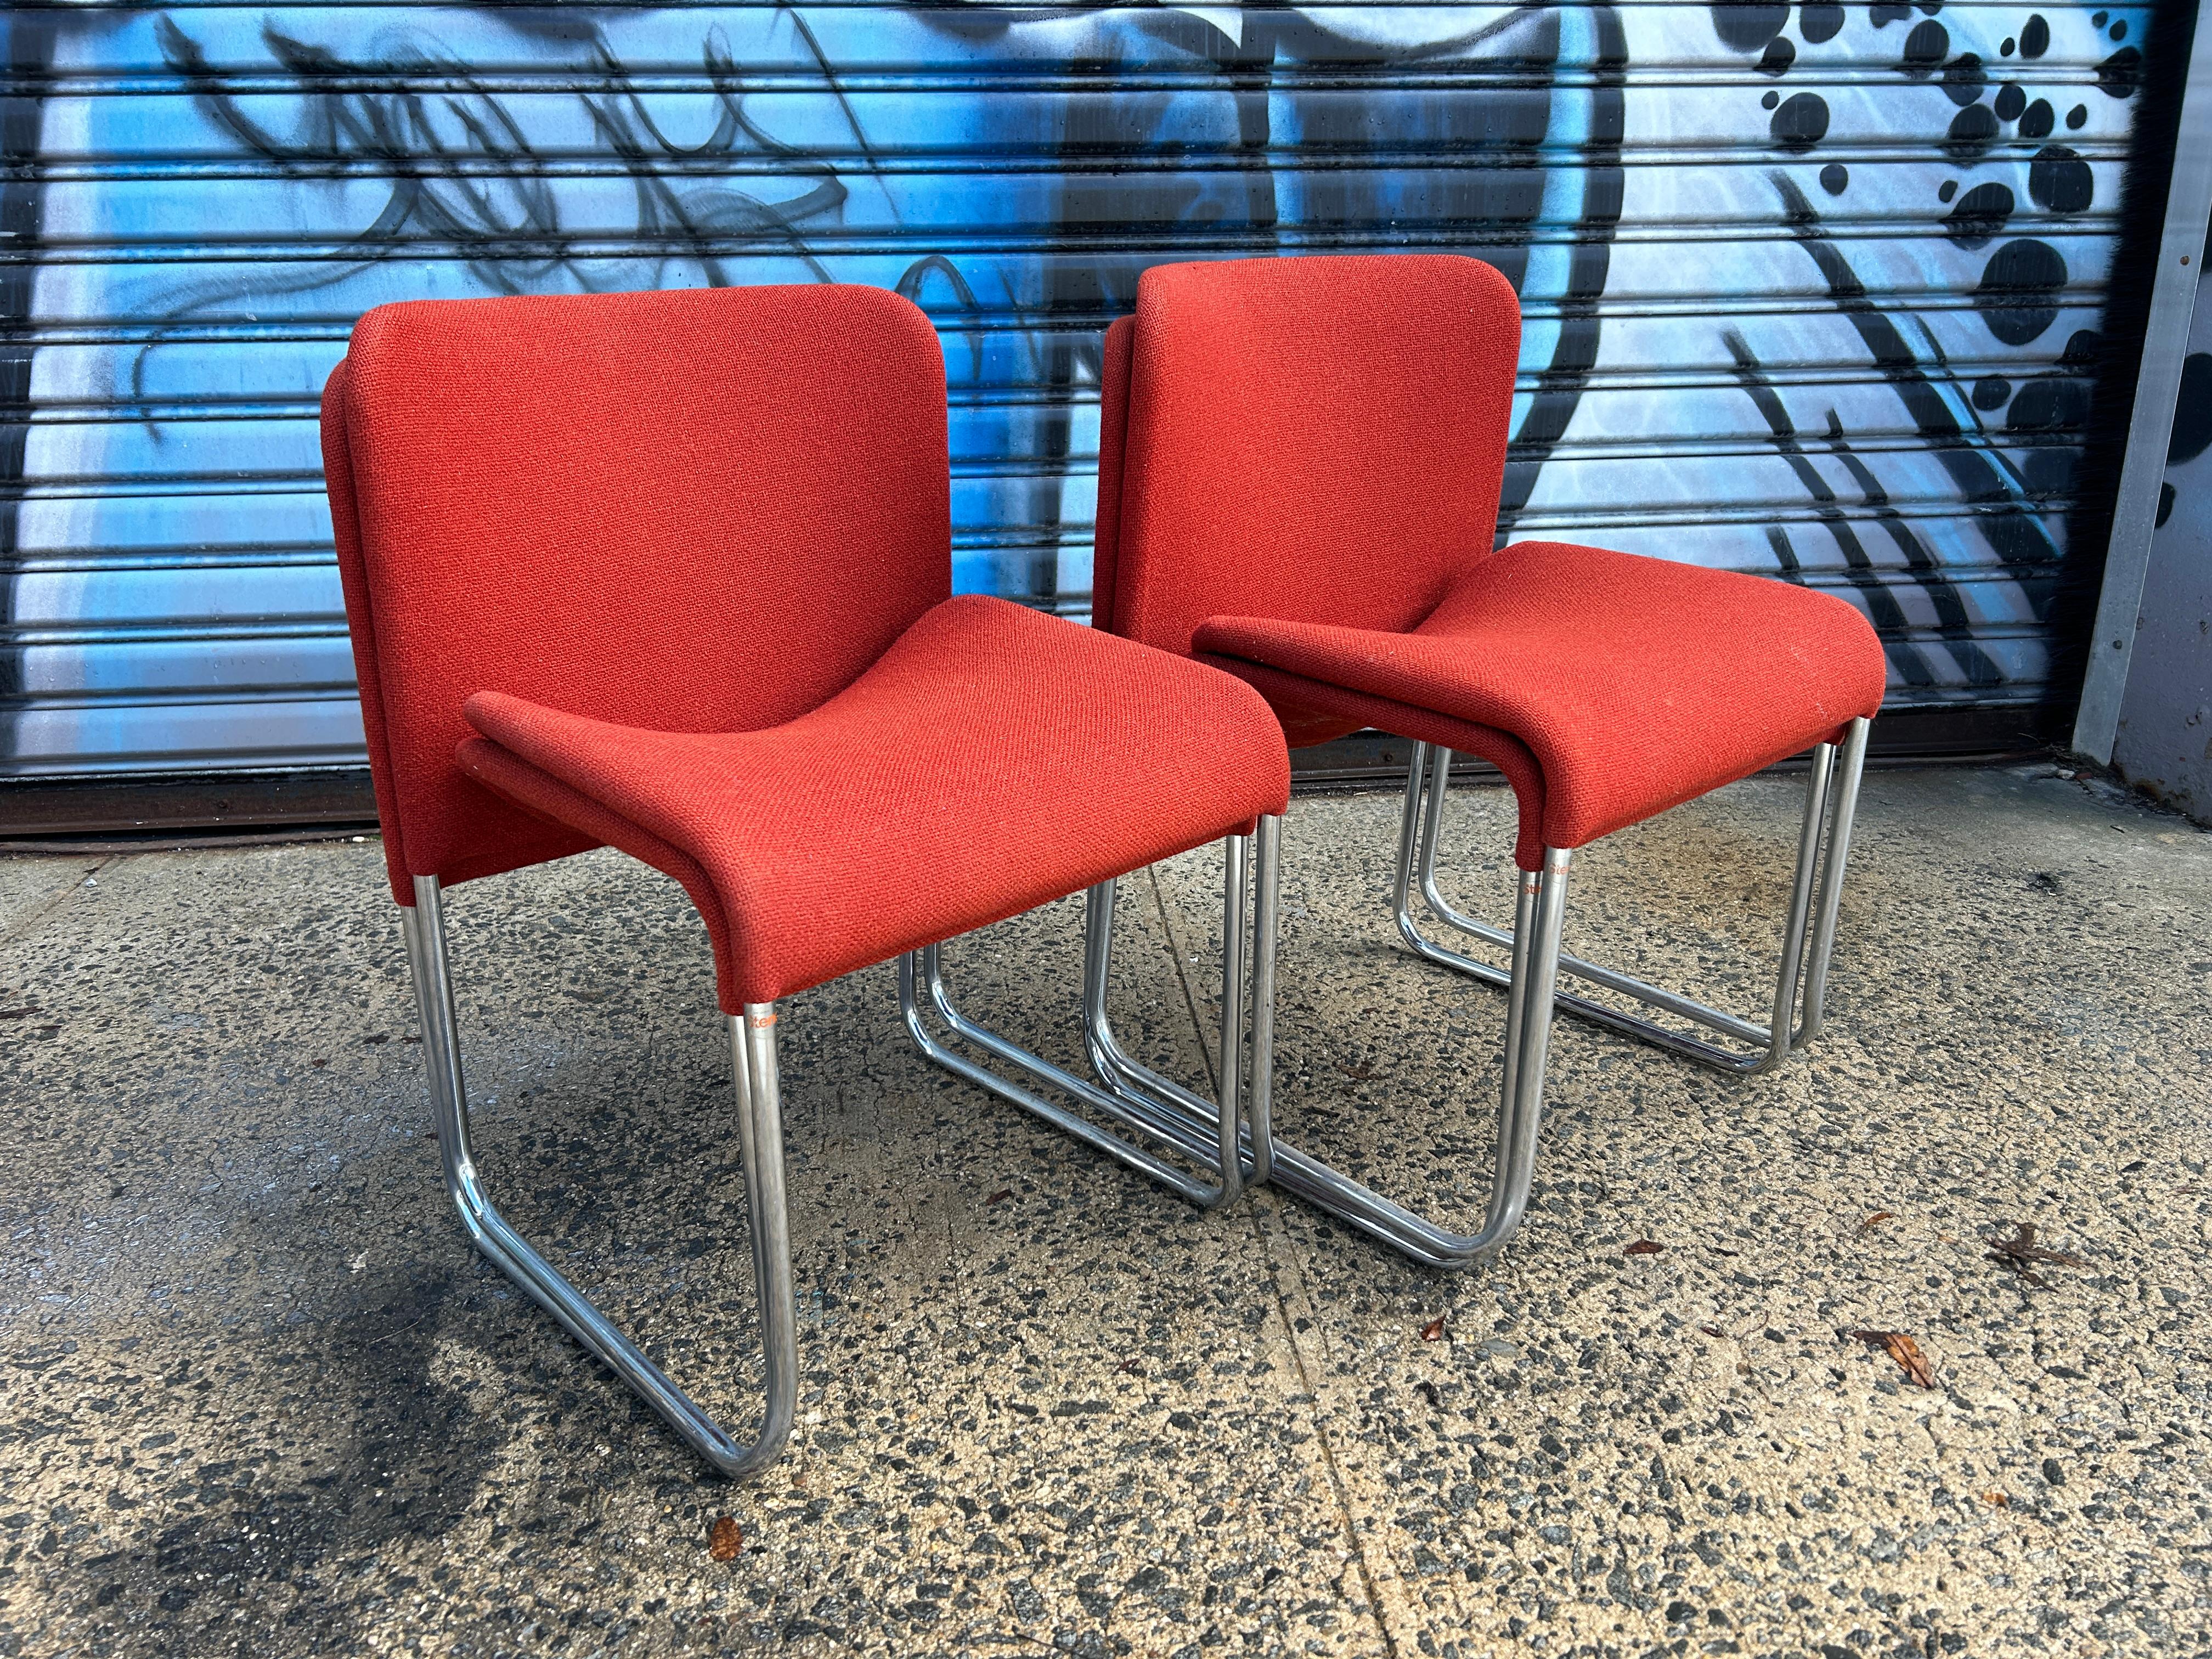 Post-Modern Rare Set (4) Ecco chrome red woven wool Stackable chairs by Møre Design team For Sale